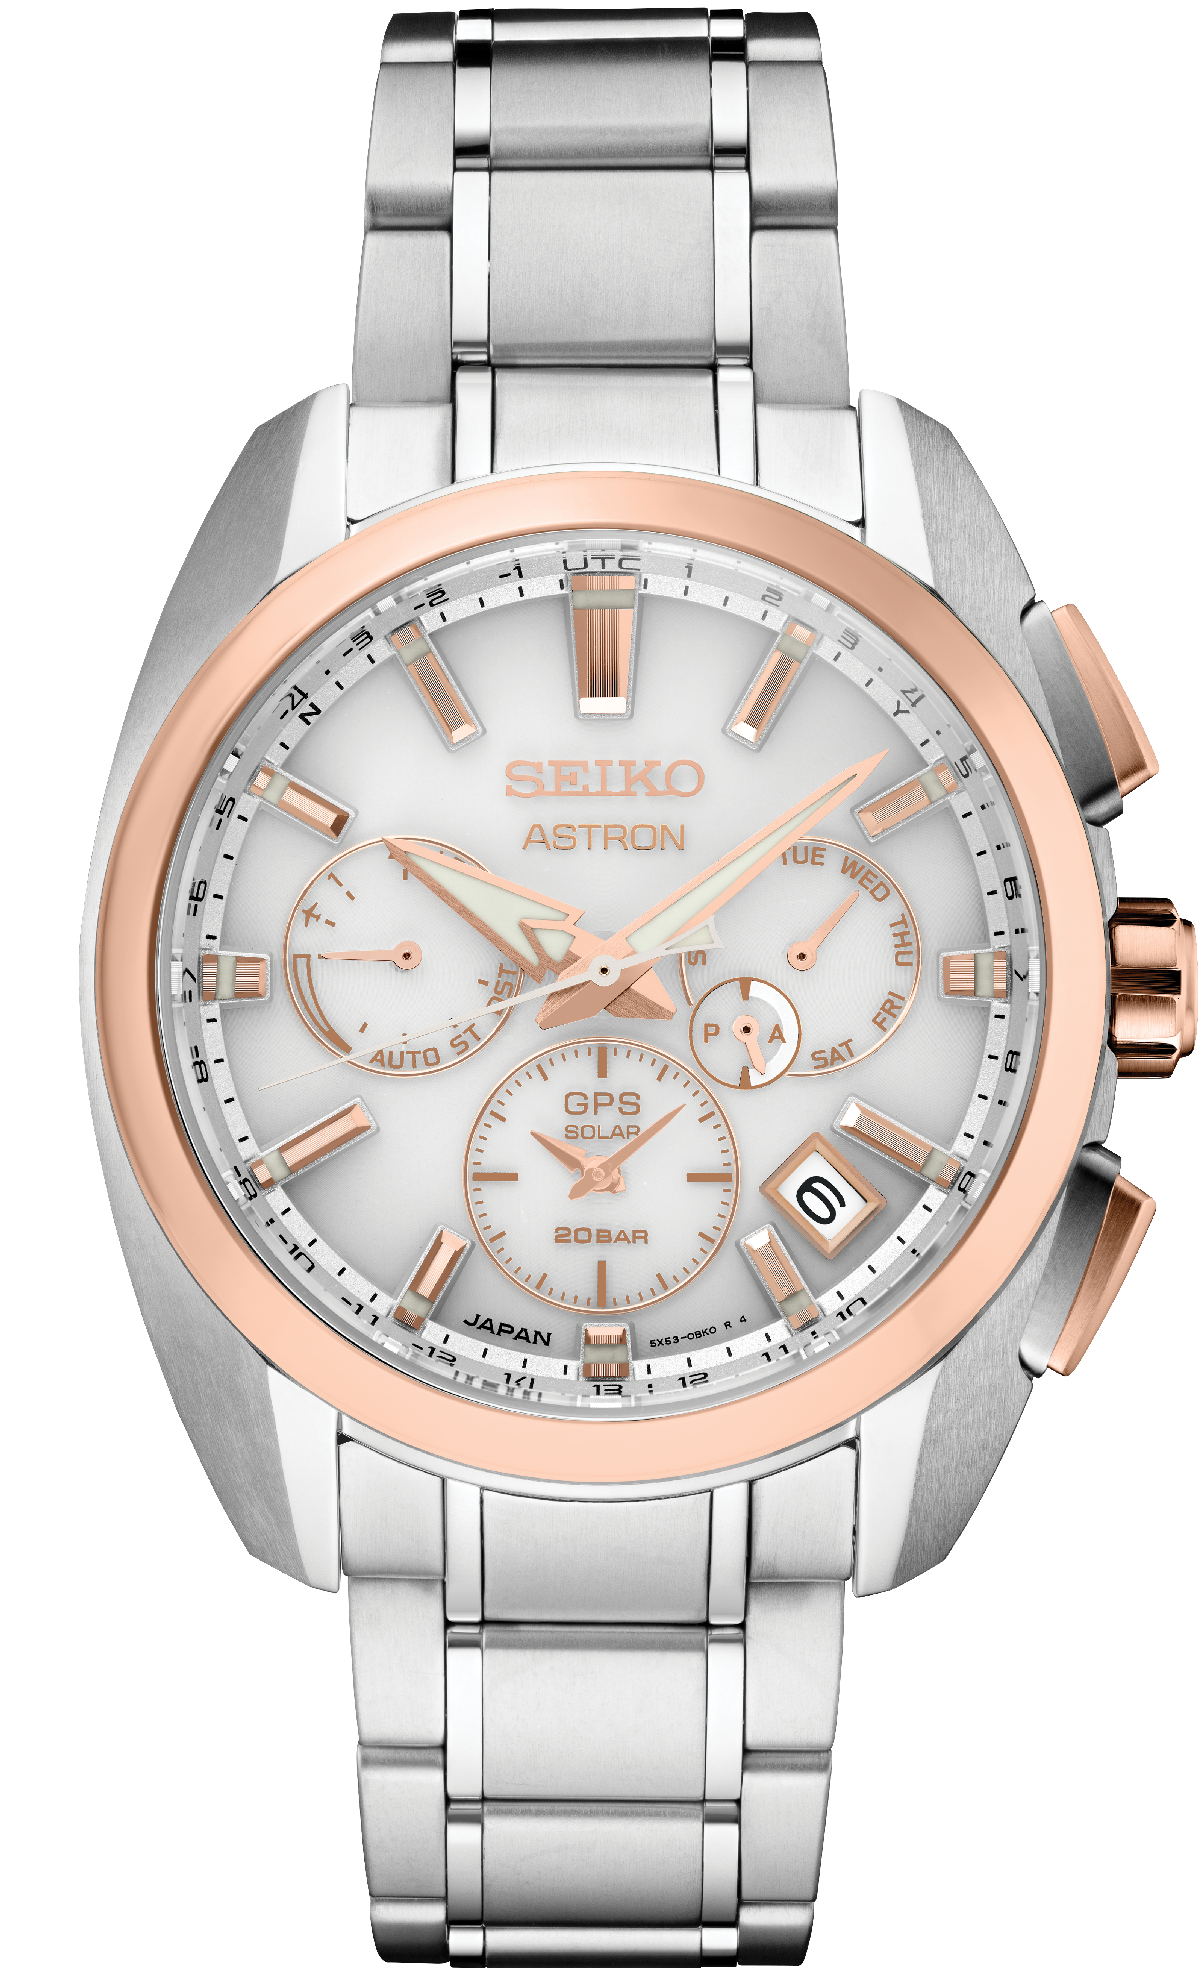 Seiko Astron GPS Solar white dial with rose gold accents SSH104